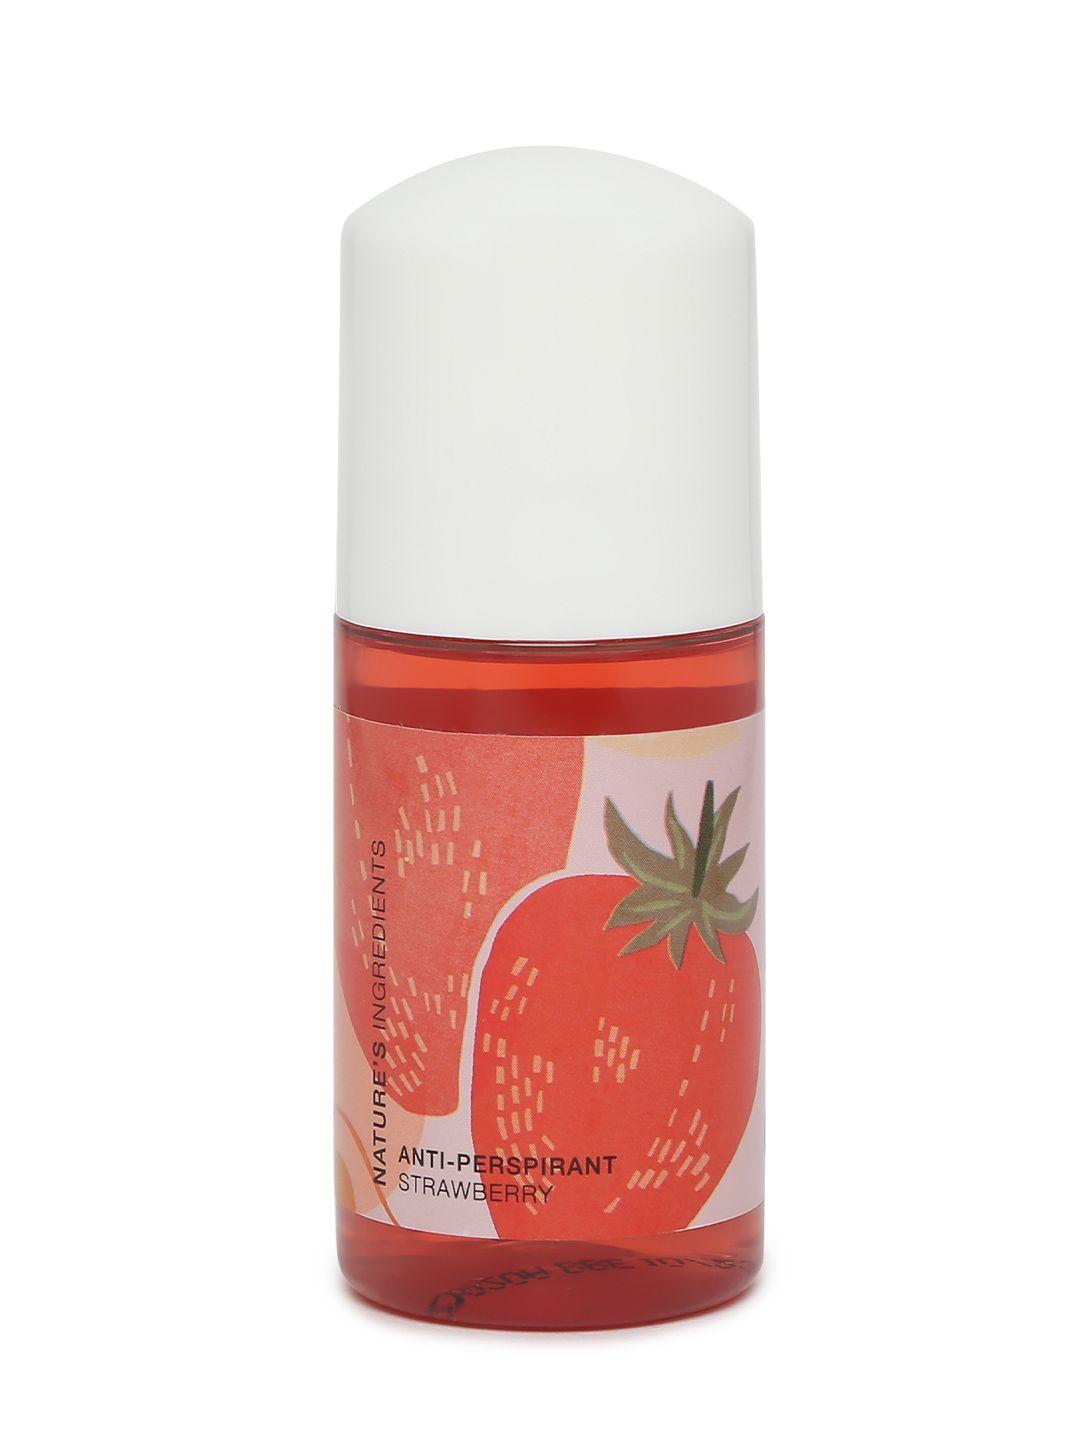 marks & spencer natures ingredients strawberry anti-perspirant roll-on deodorant - 50 ml